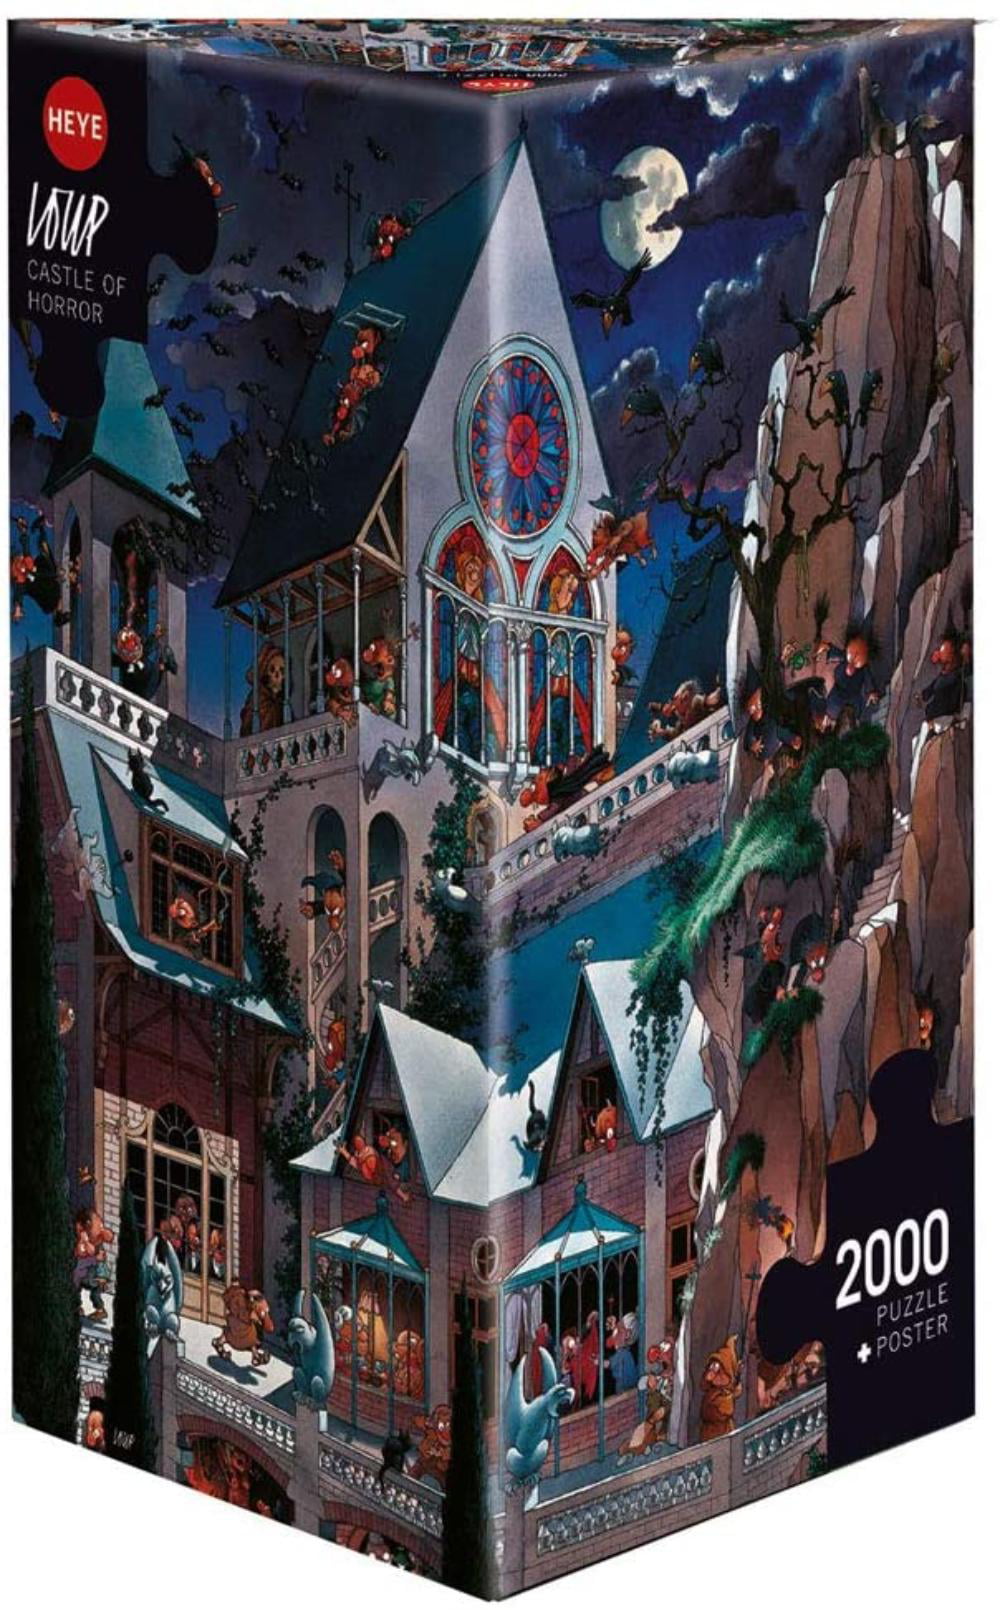 NEW Heye Jigsaw Puzzle 2000 Pieces Tiles "Apocalypse" by Jean-Jaques Loup 